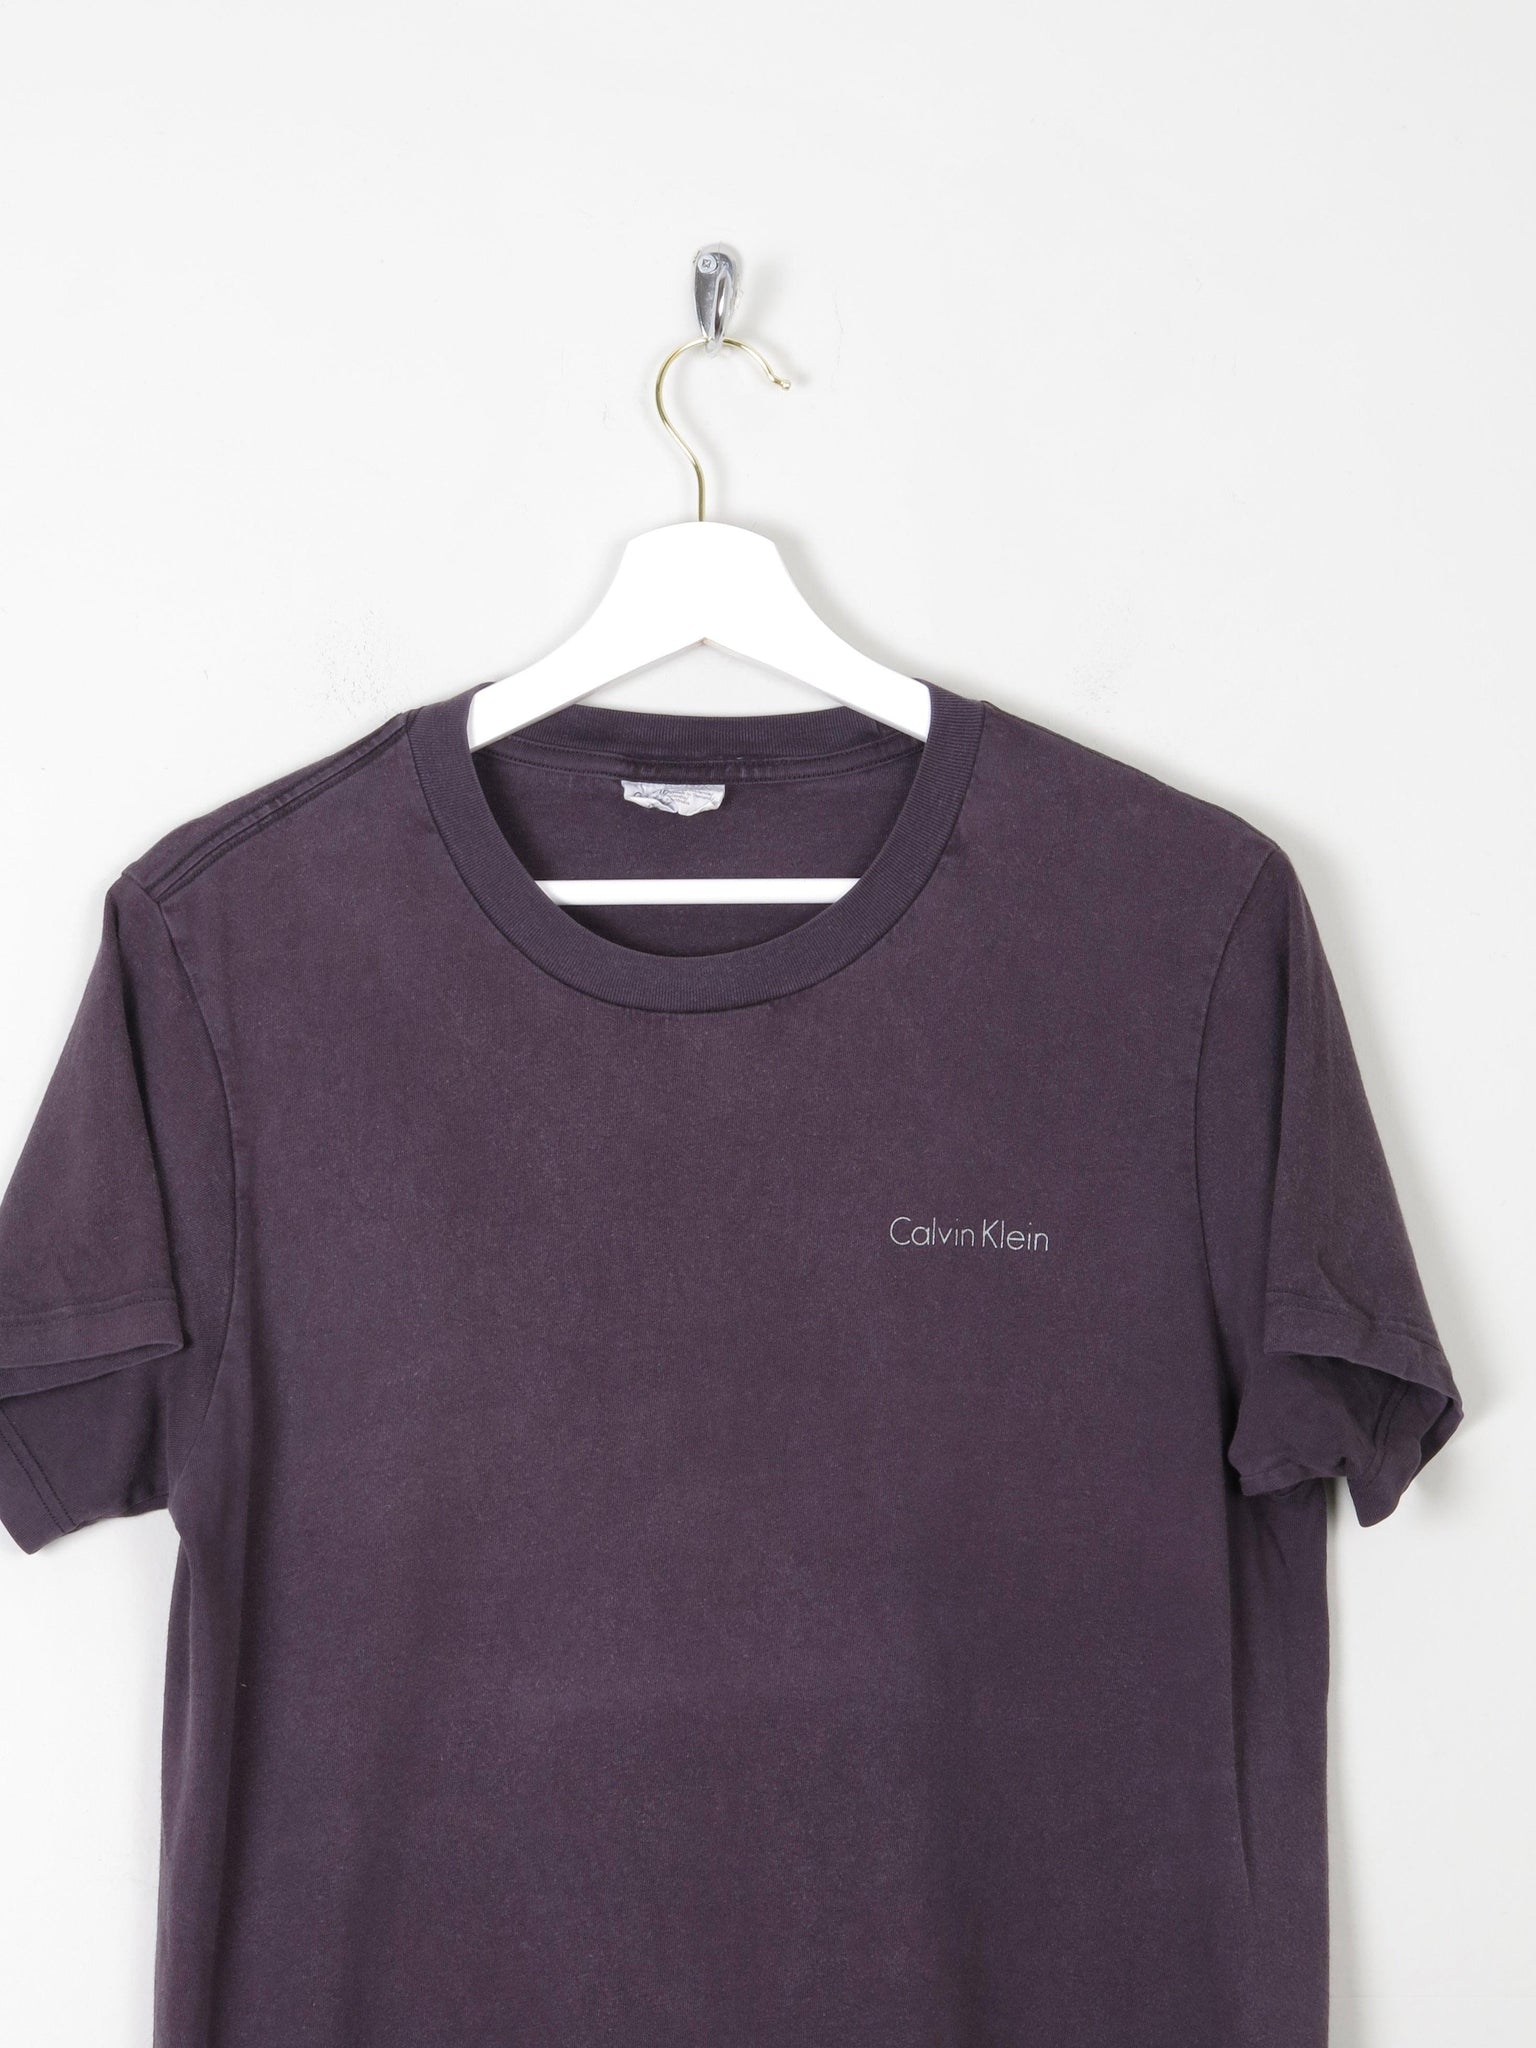 Men's Faded Black/Charcoal Calvin Klein T-shirt S - The Harlequin